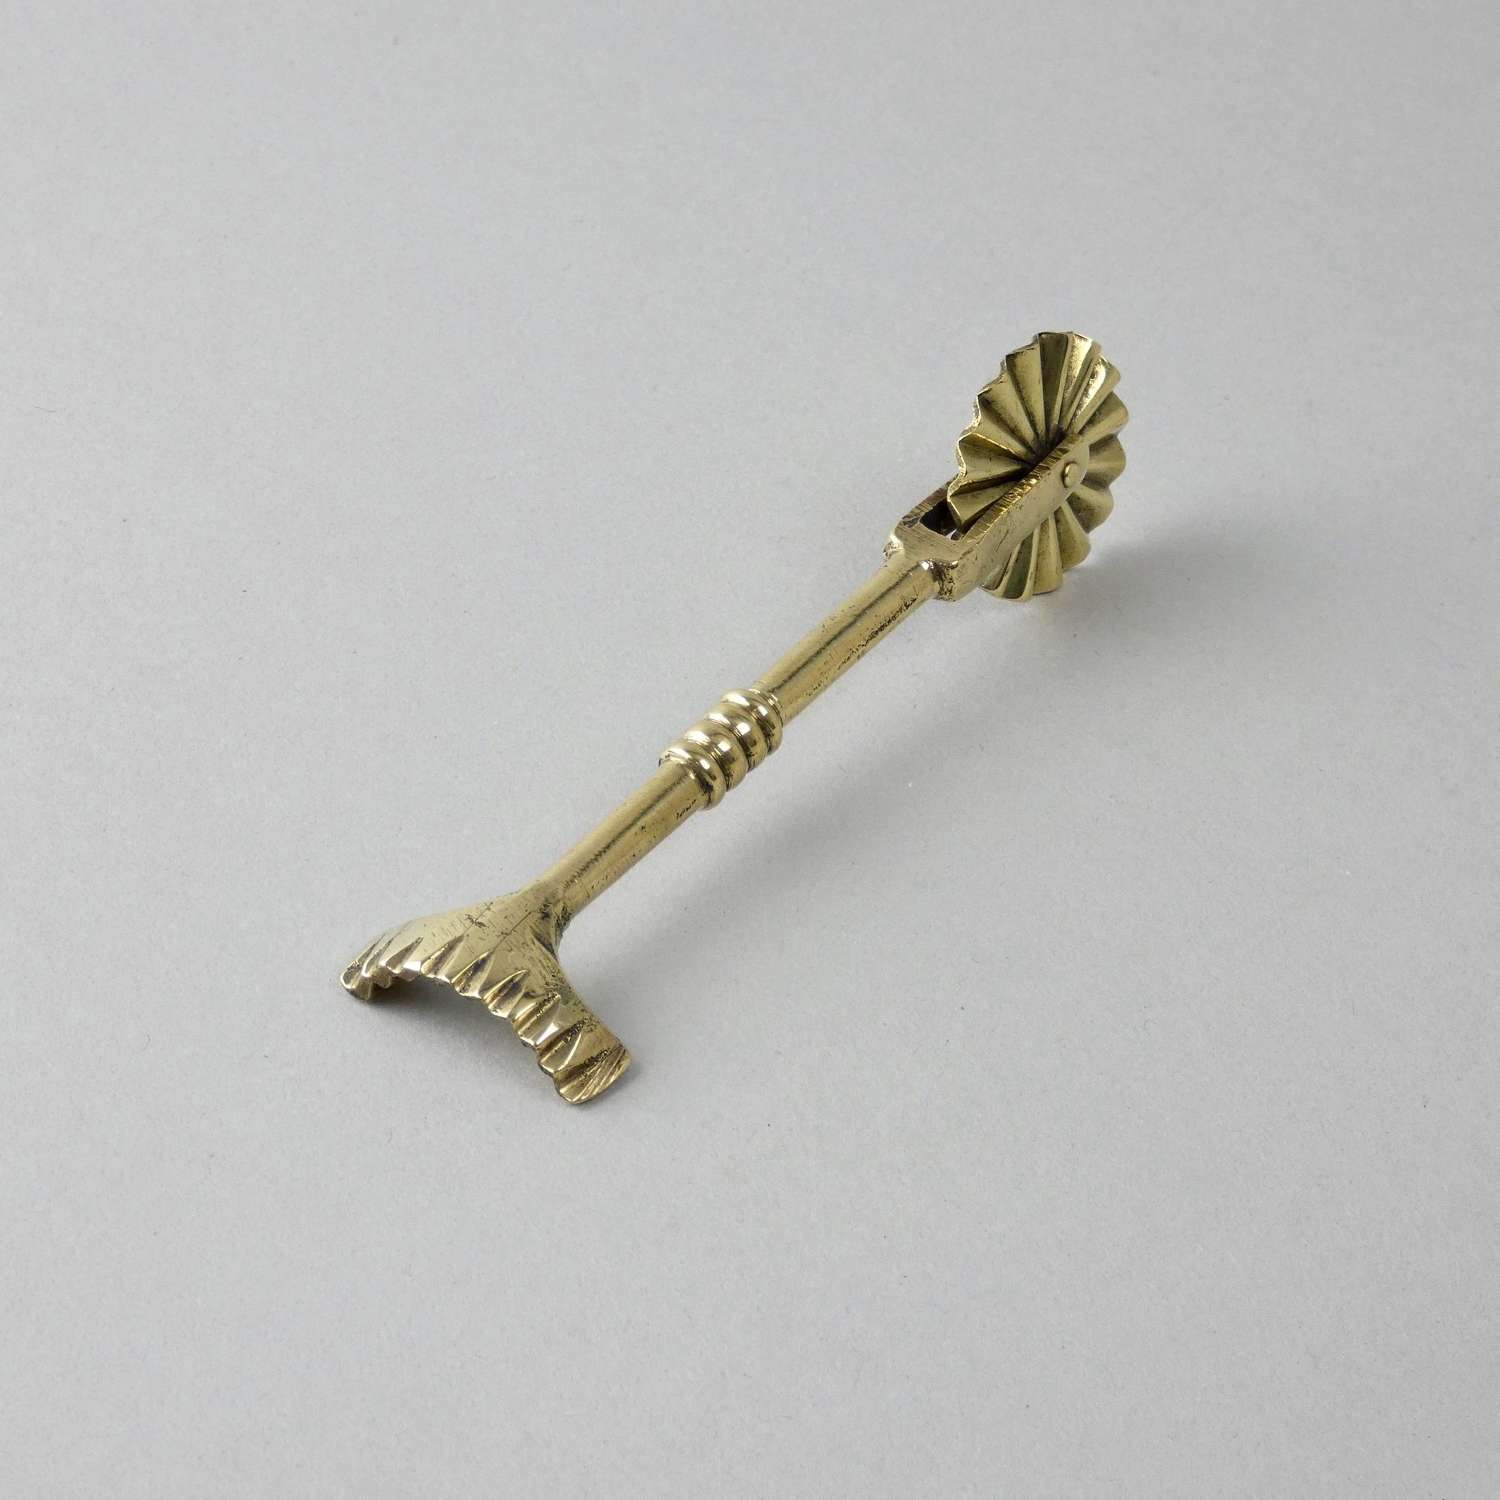 Small, brass pastry tool